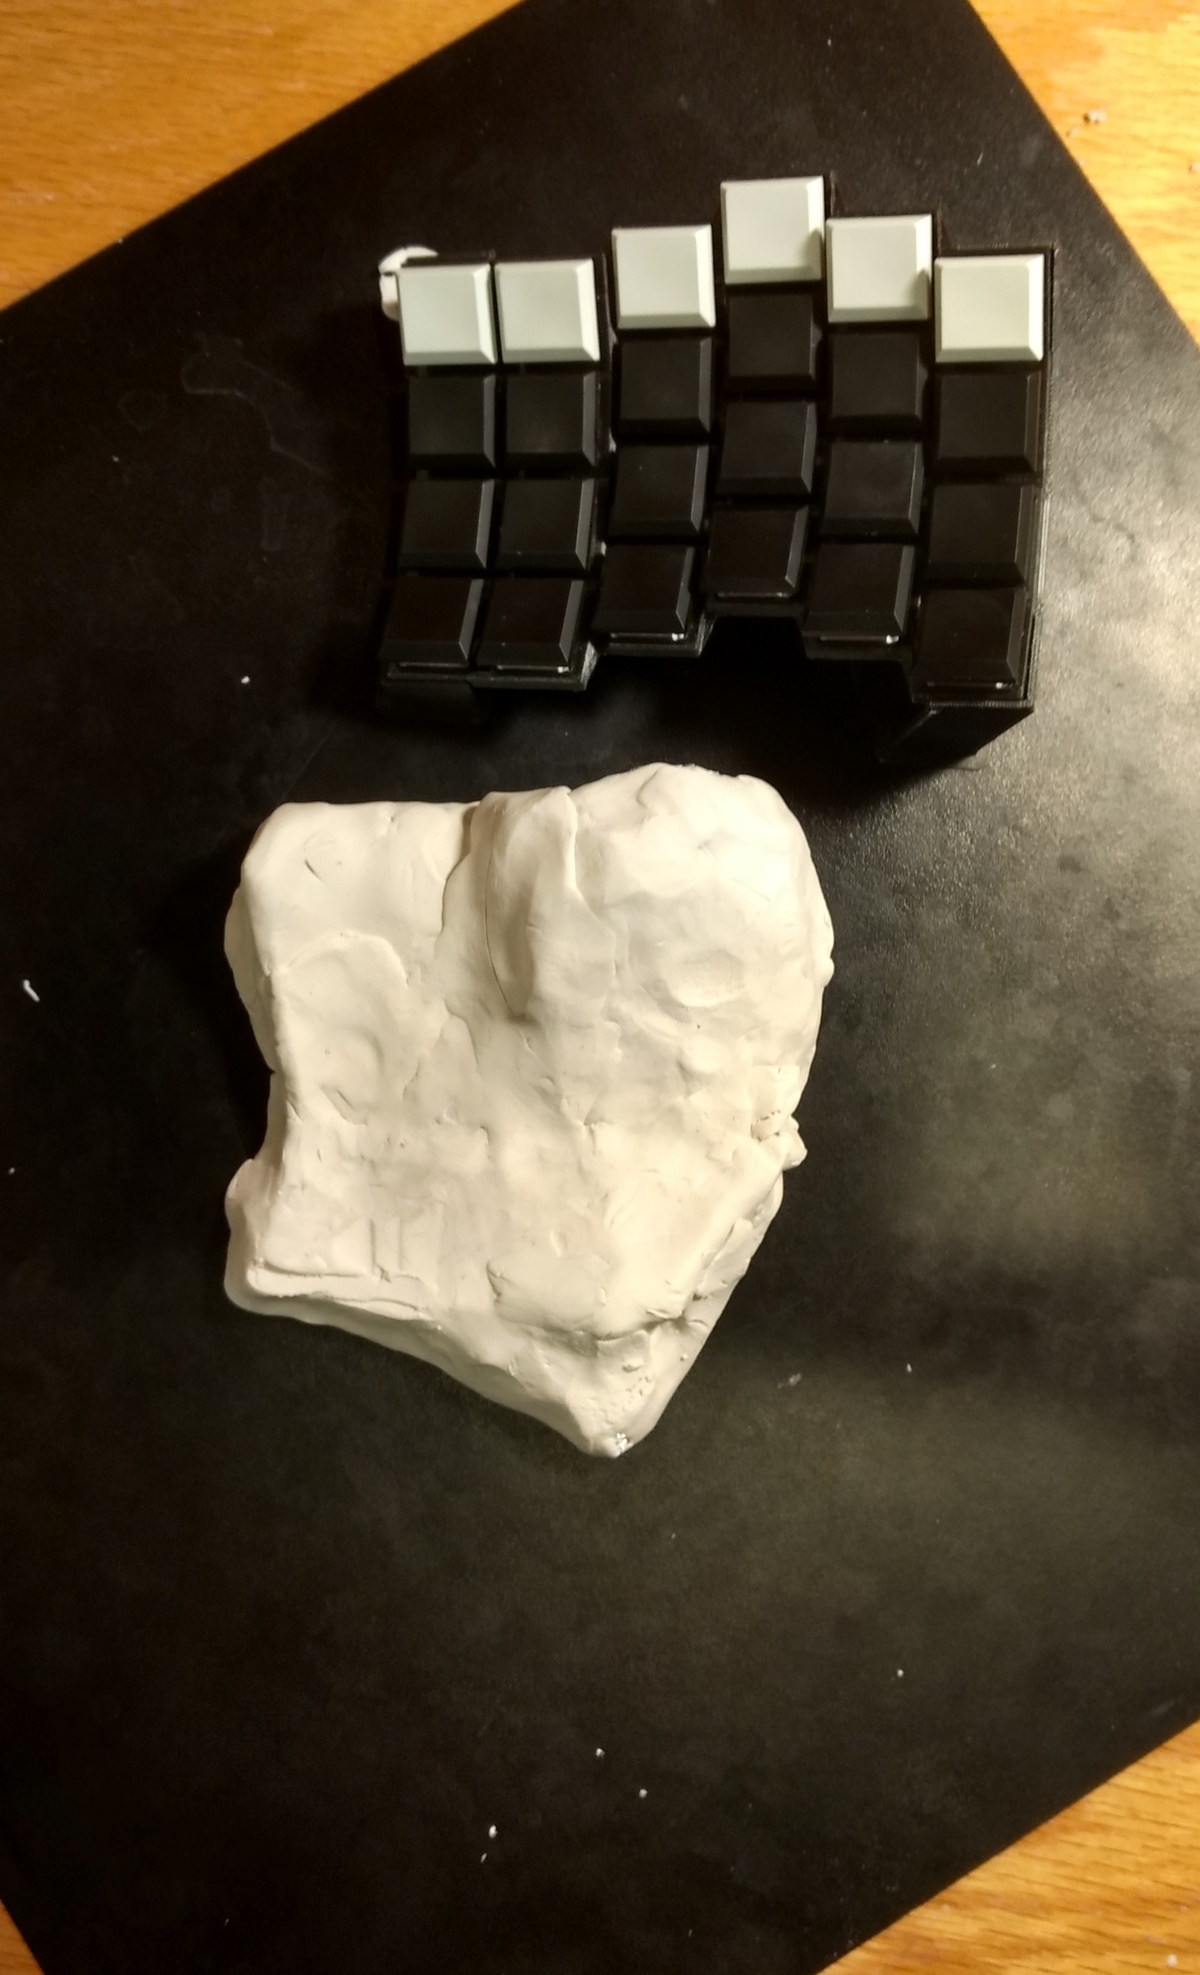 Very rough wrist rest made out of Sculpey